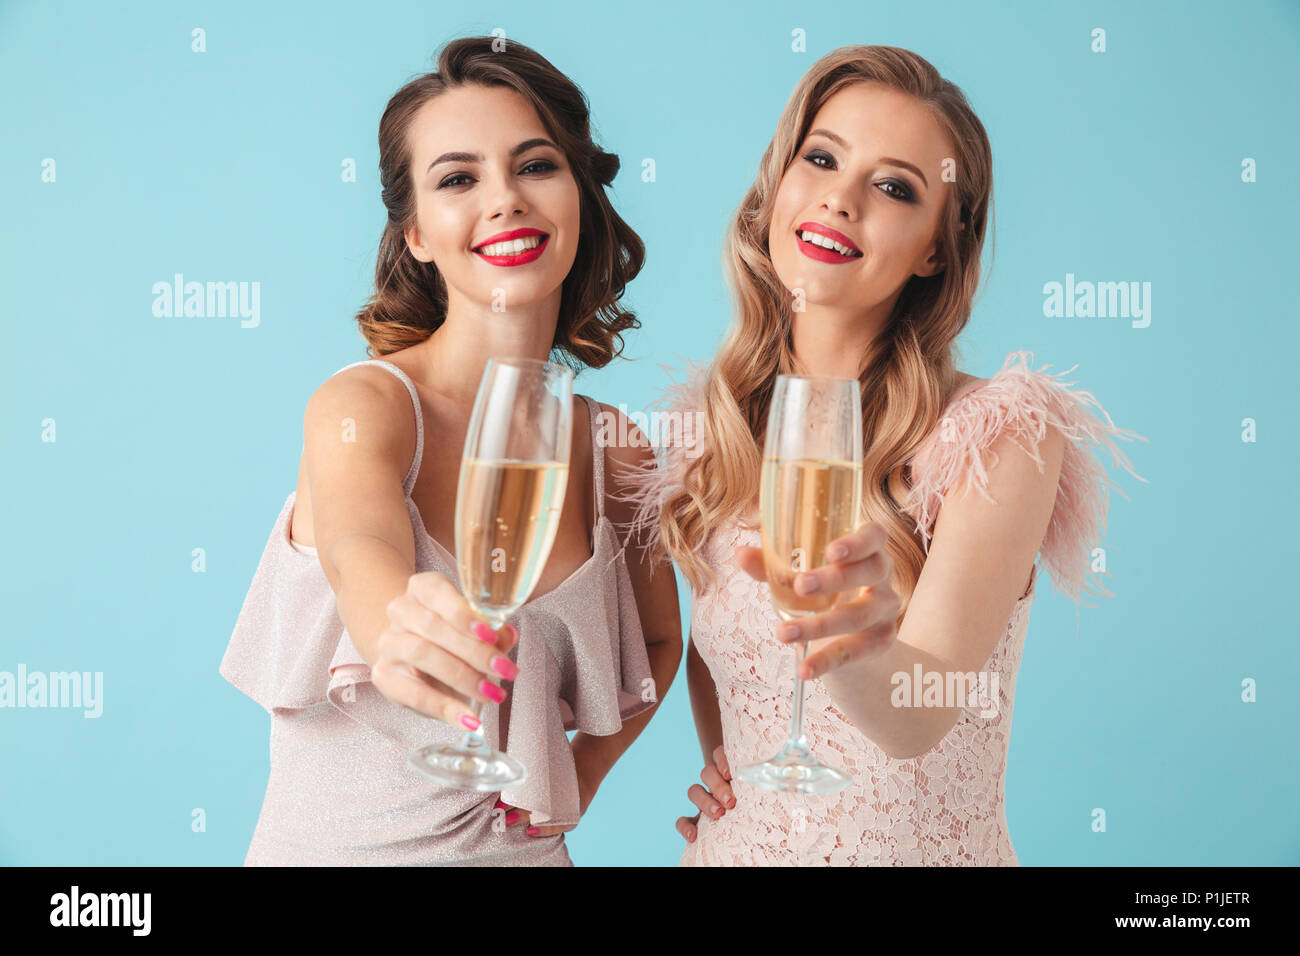 Two happy women in dresses posing together drinking champagne and looking at the camera over turquoise background Stock Photo